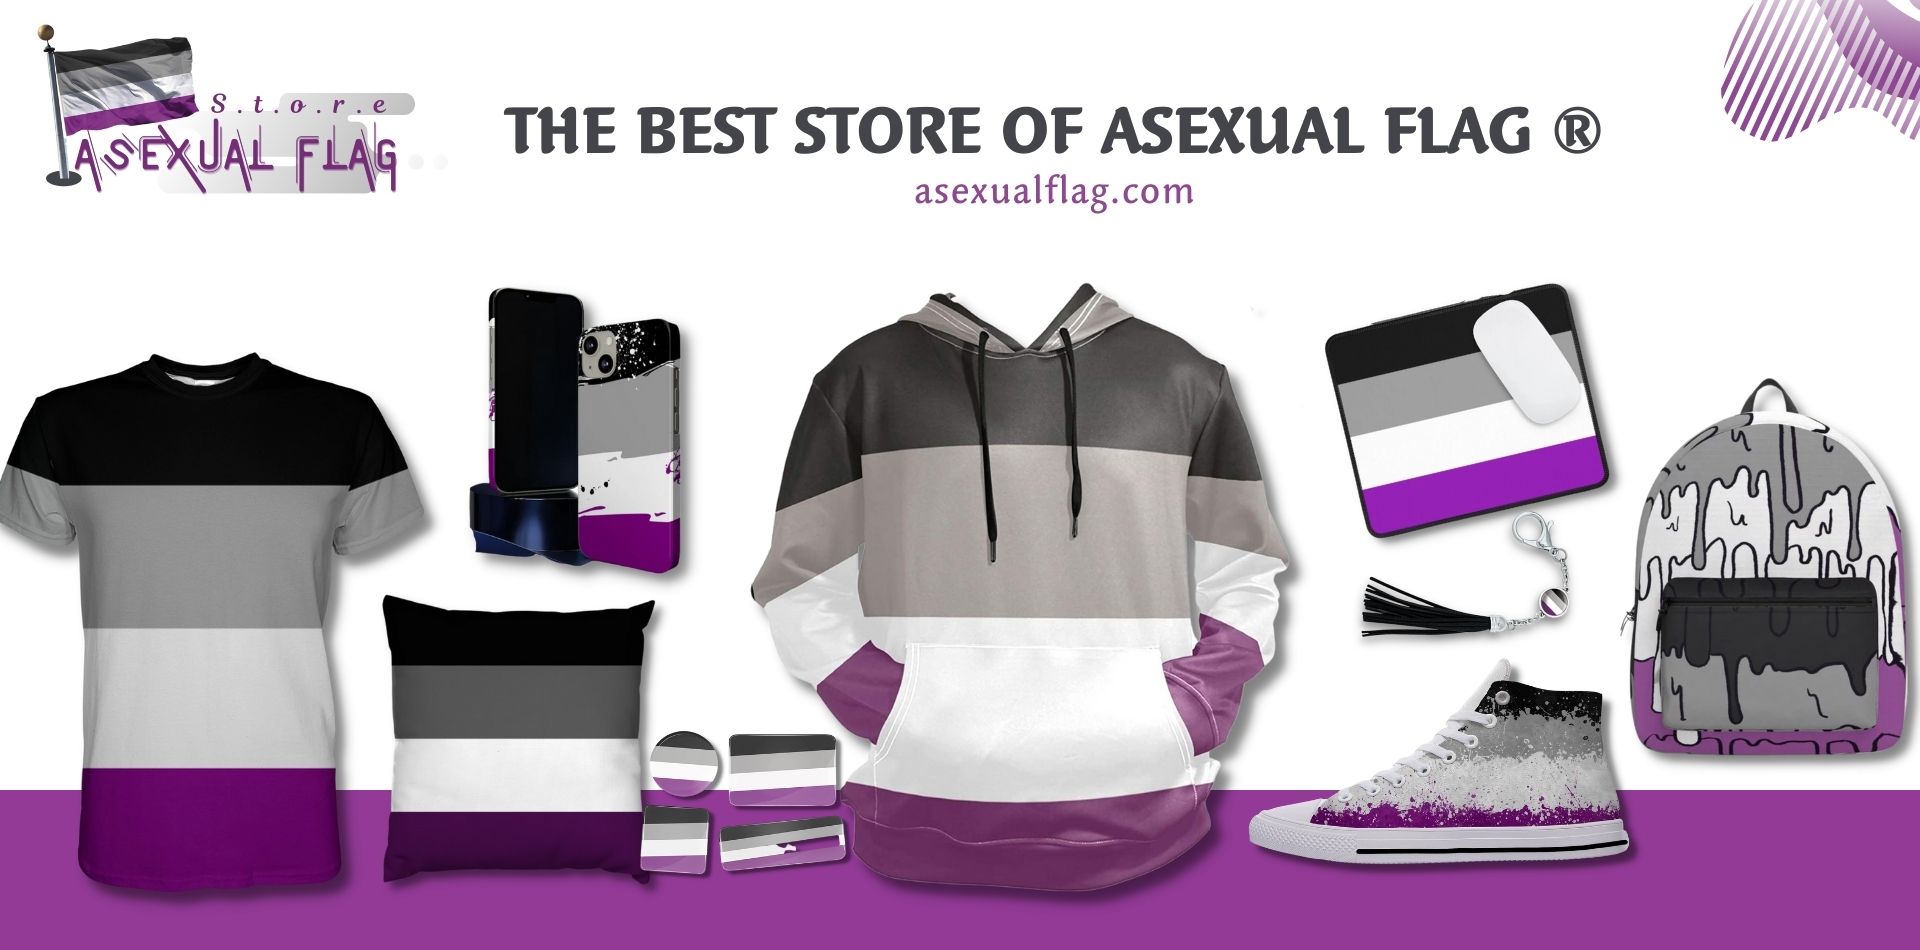 ASEXUAL PRIDE FLAG STORE Web Banner - Asexual Flag™